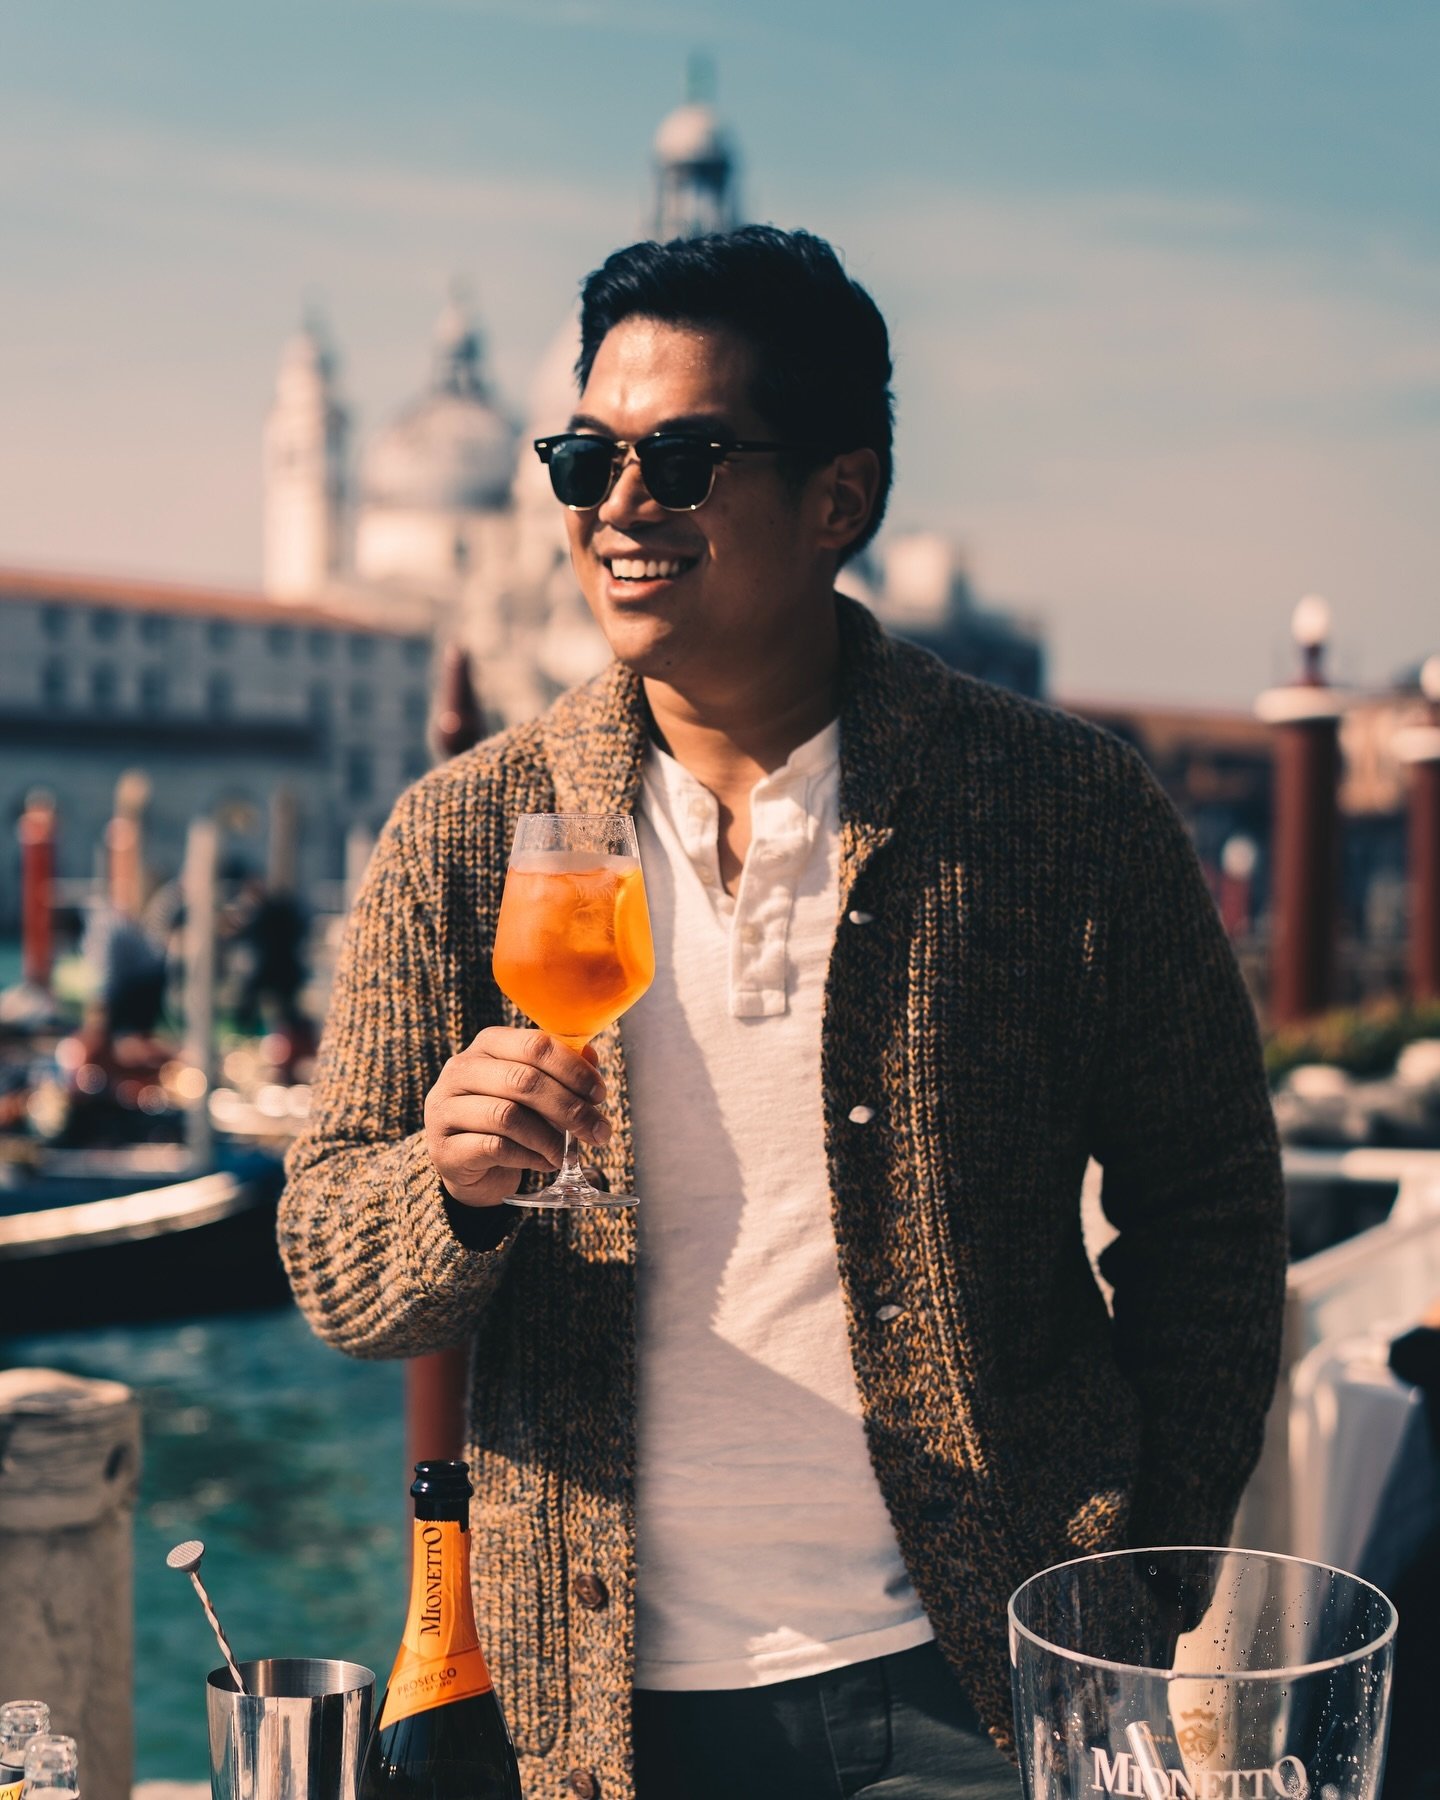 Mentally, I&rsquo;m still in Venice 😏

Full recap on this incredible trip with the @mionettoproseccousa team coming soon. Can&rsquo;t wait to show you everything we did in those four days in Italy 🍾 stay tuned. 

📸: @fabriziomacali 🙌🏾
&mdash;
#h